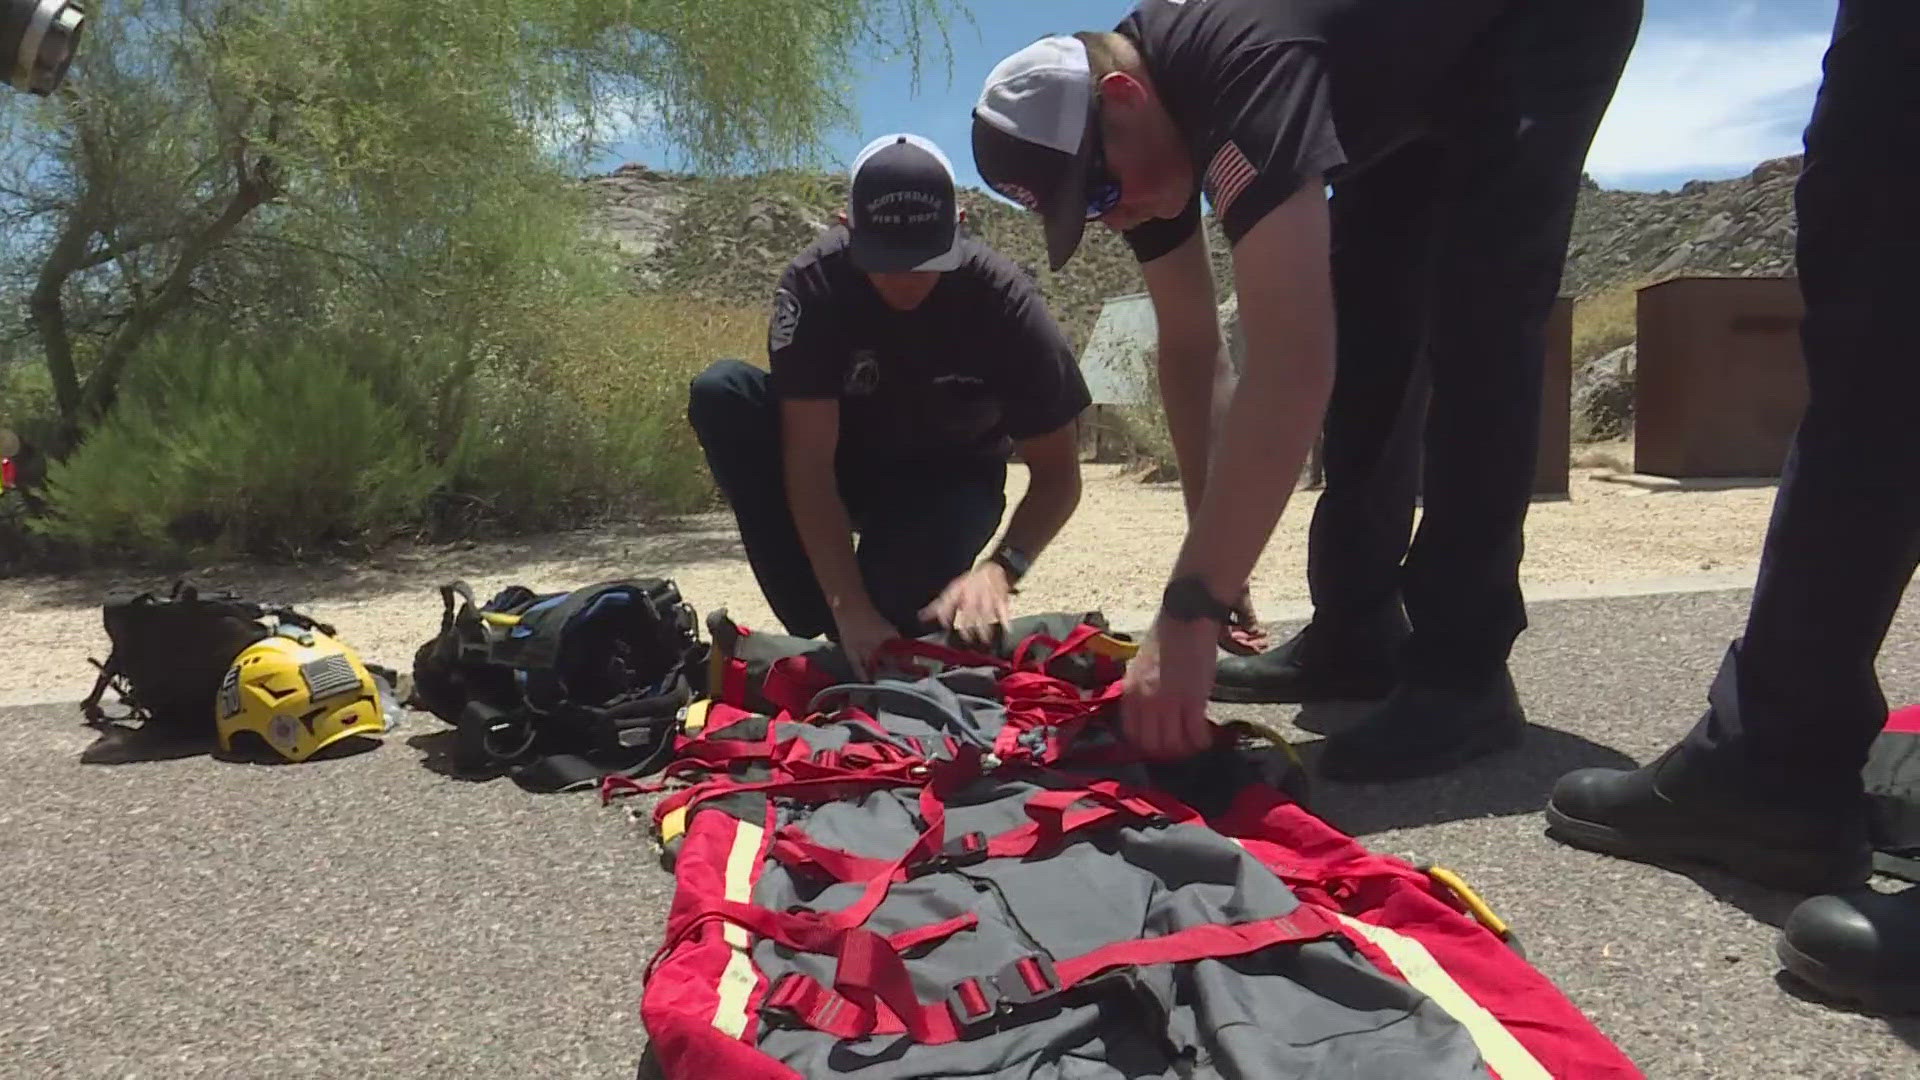 Valley firefighters are urging hikers to be prepared if they plan to go for hike in the hot weather.